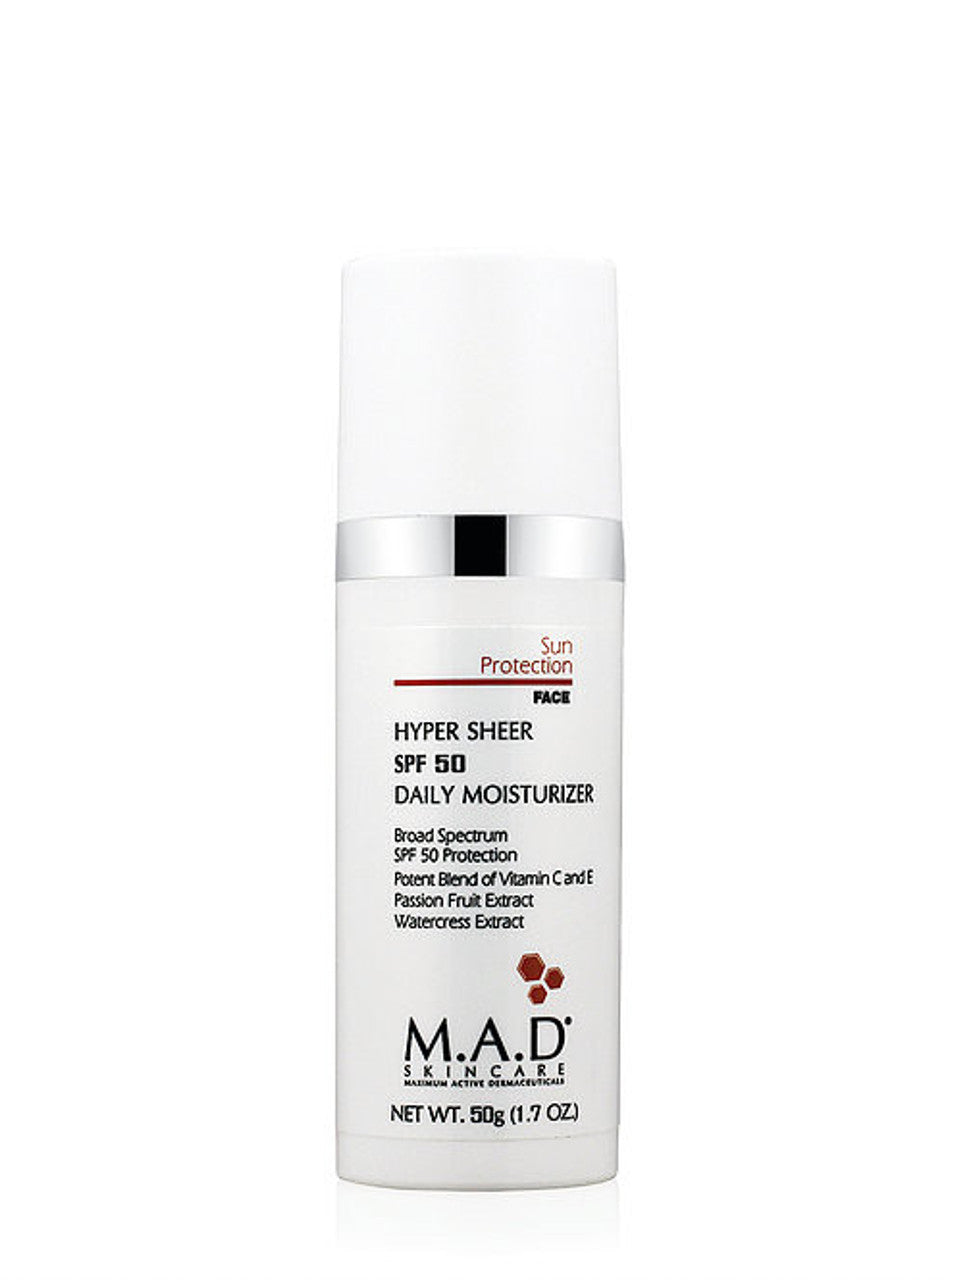 Hyper Sheer SPF 50 Daily Moisturizer by M.A.D Skincare